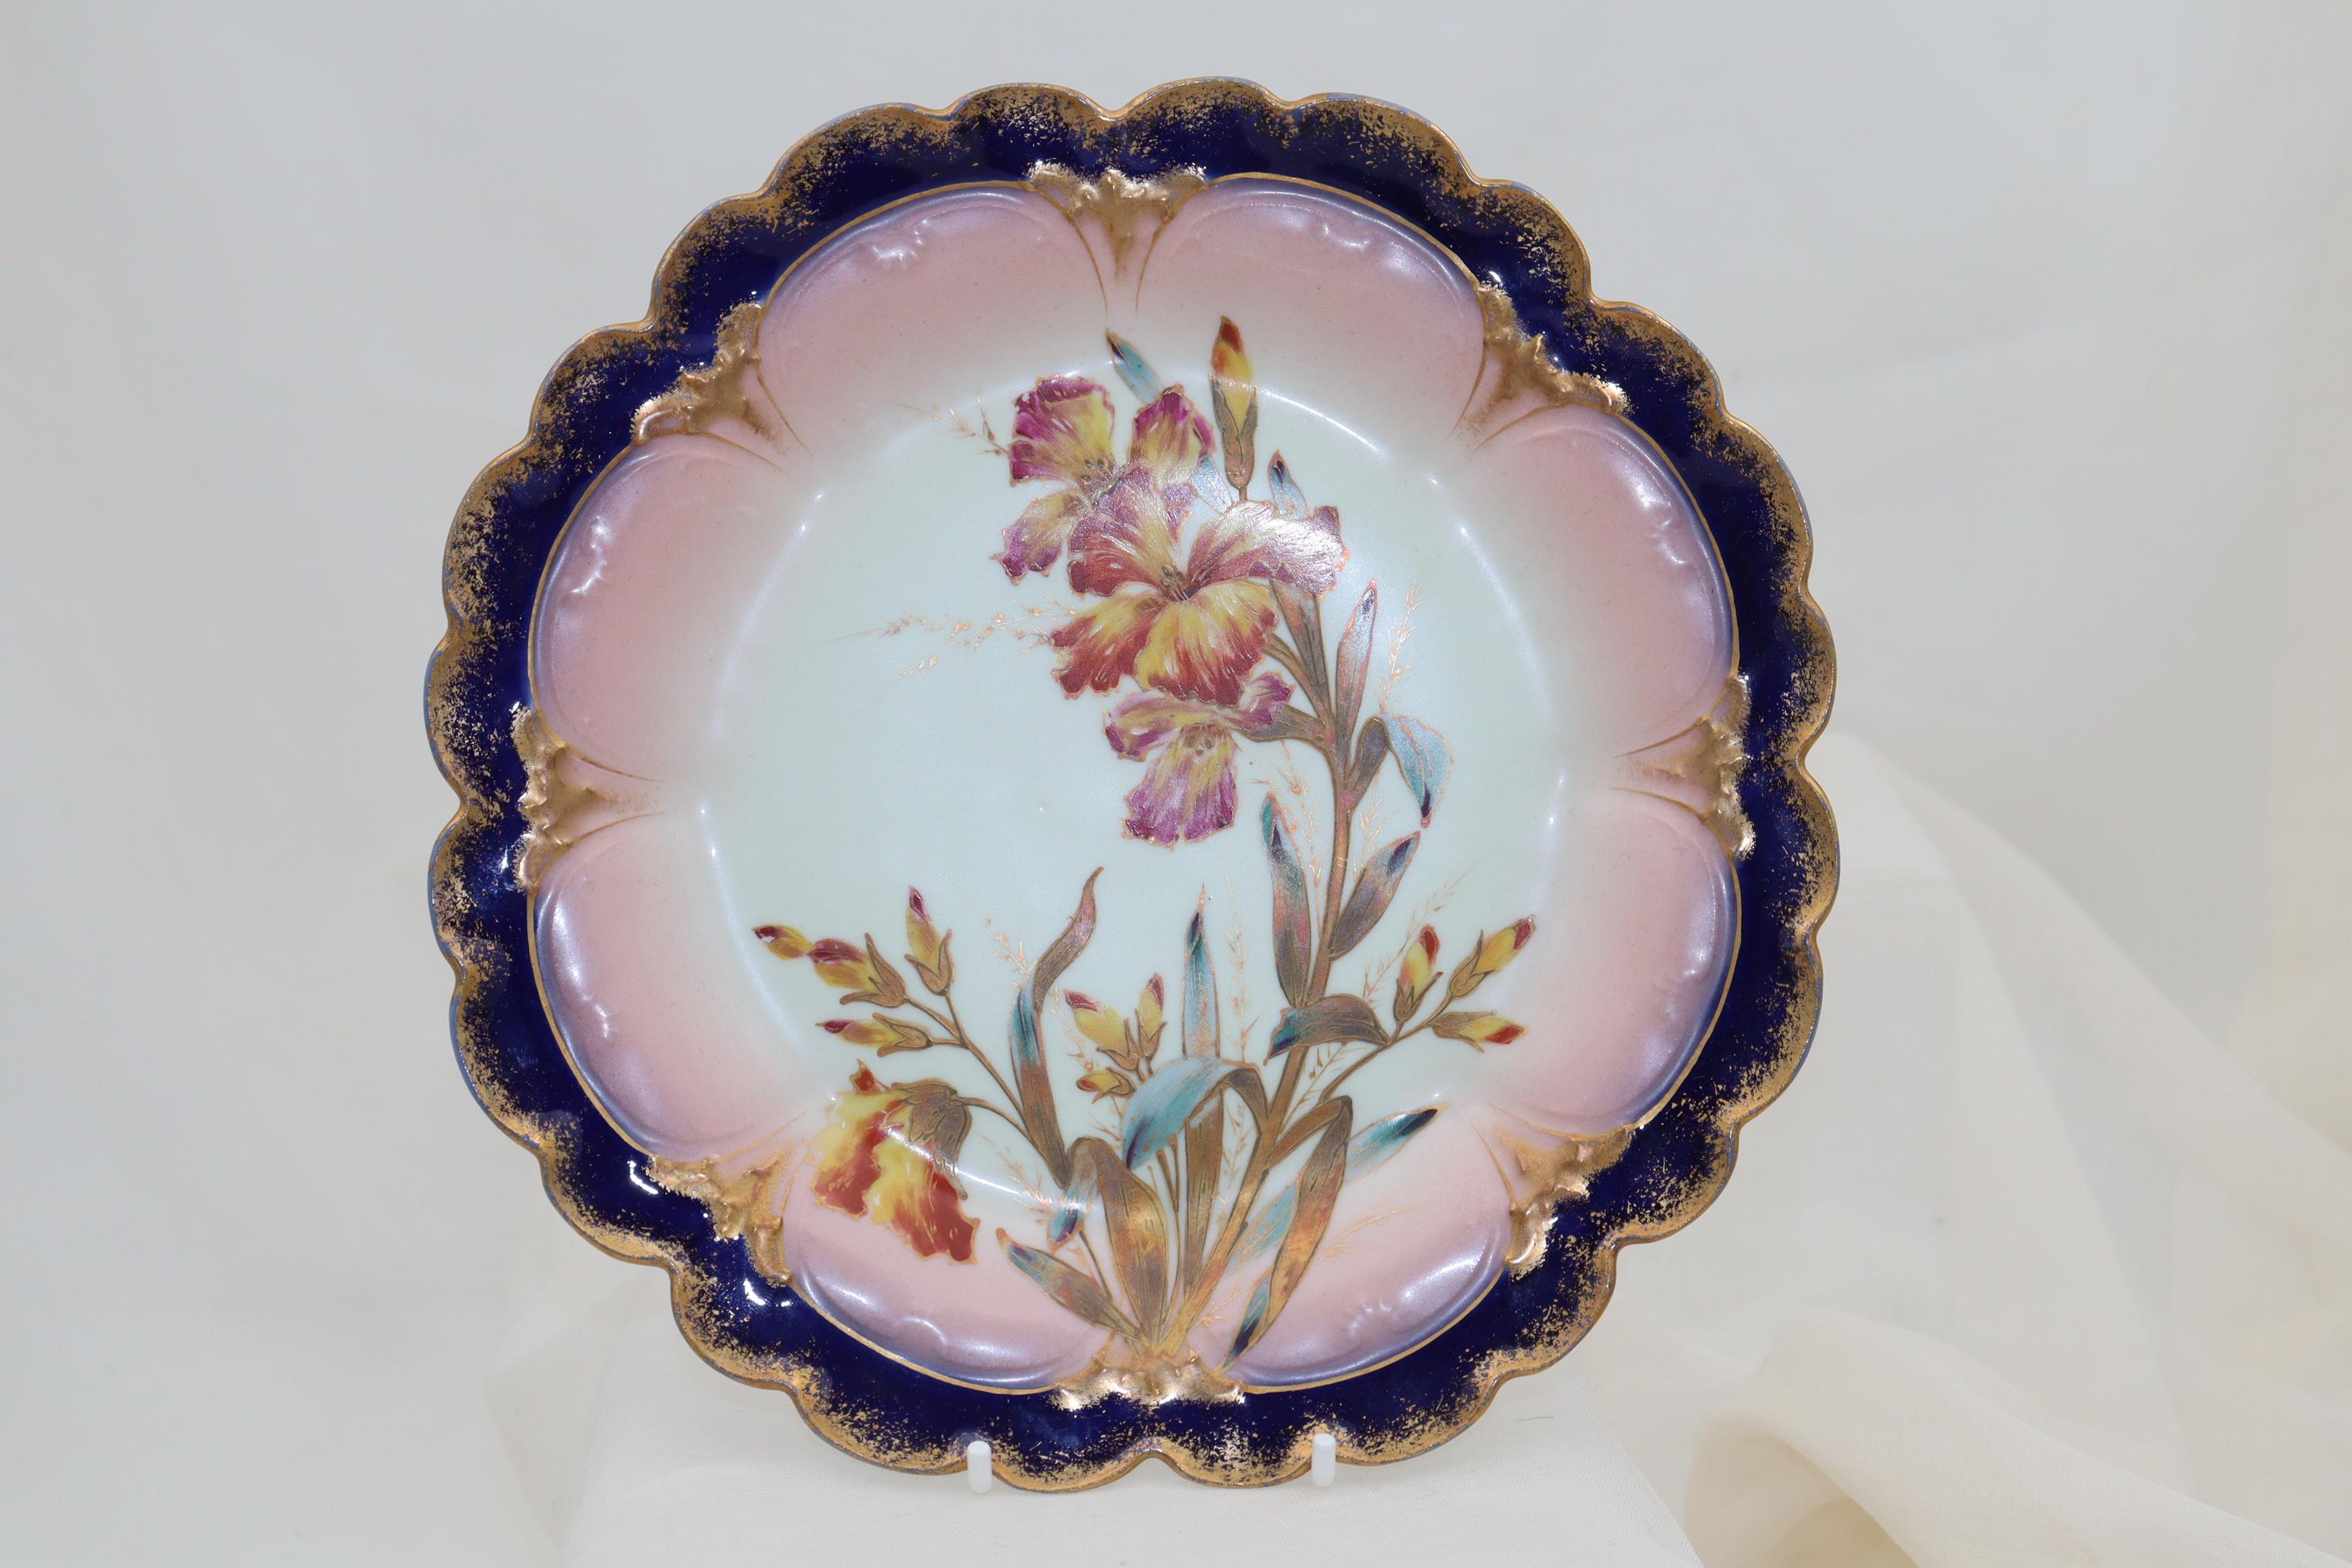 These four hand painted and gilded porcelain dessert plates with a scalloped edge are by the firm of Gerard, Dufraisseix and Abbot, who were known as one of the best producers in the Limoges region of France. The central decoration is of a spray of